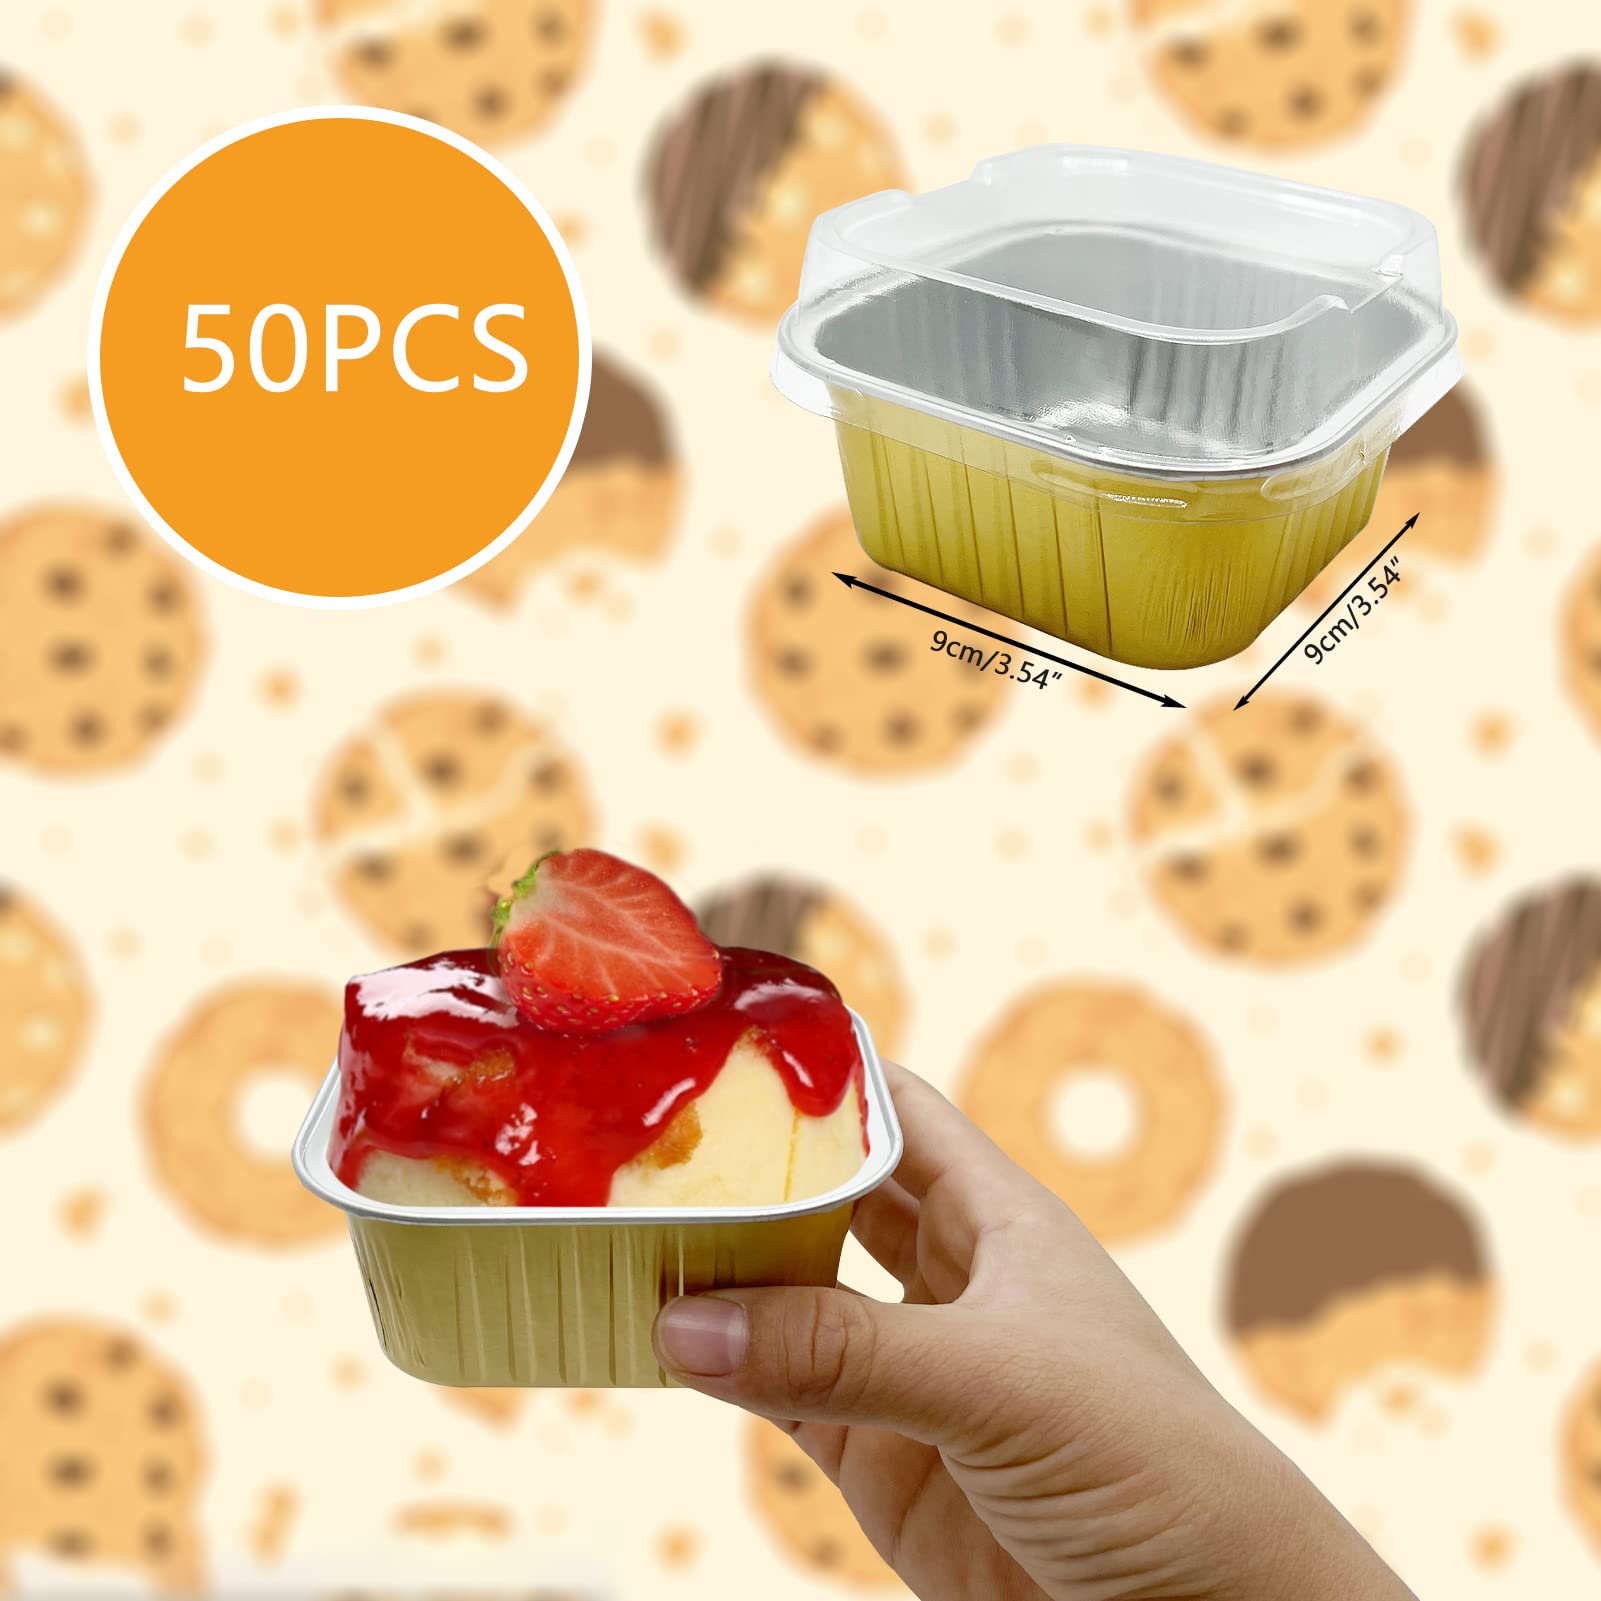 50 Pcs Aluminum Foil Mini Square Baking Cups with Lids,5oz Disposable Ramekins Cake Pans,Cupcake Baking Cups Containers for Bread Muffin Brownie Cheesecake,Gold